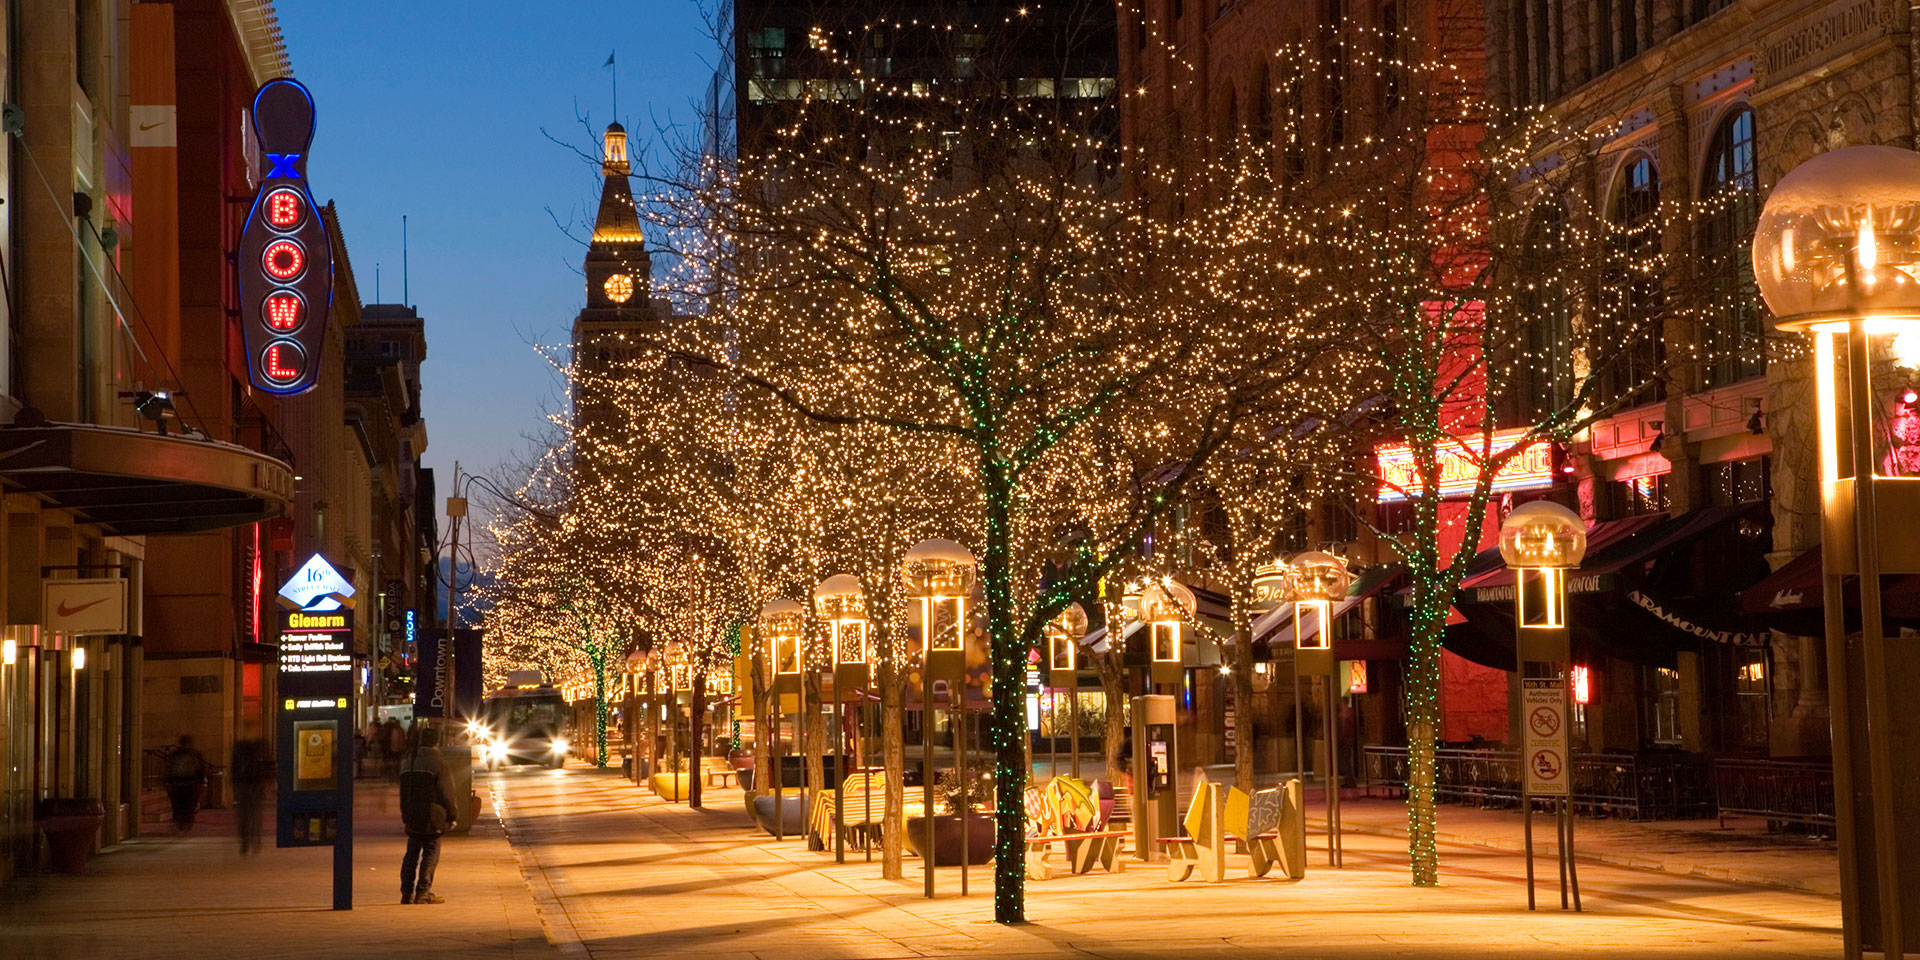 10 Reasons There’s No Place Like Denver for the Holidays LaptrinhX / News